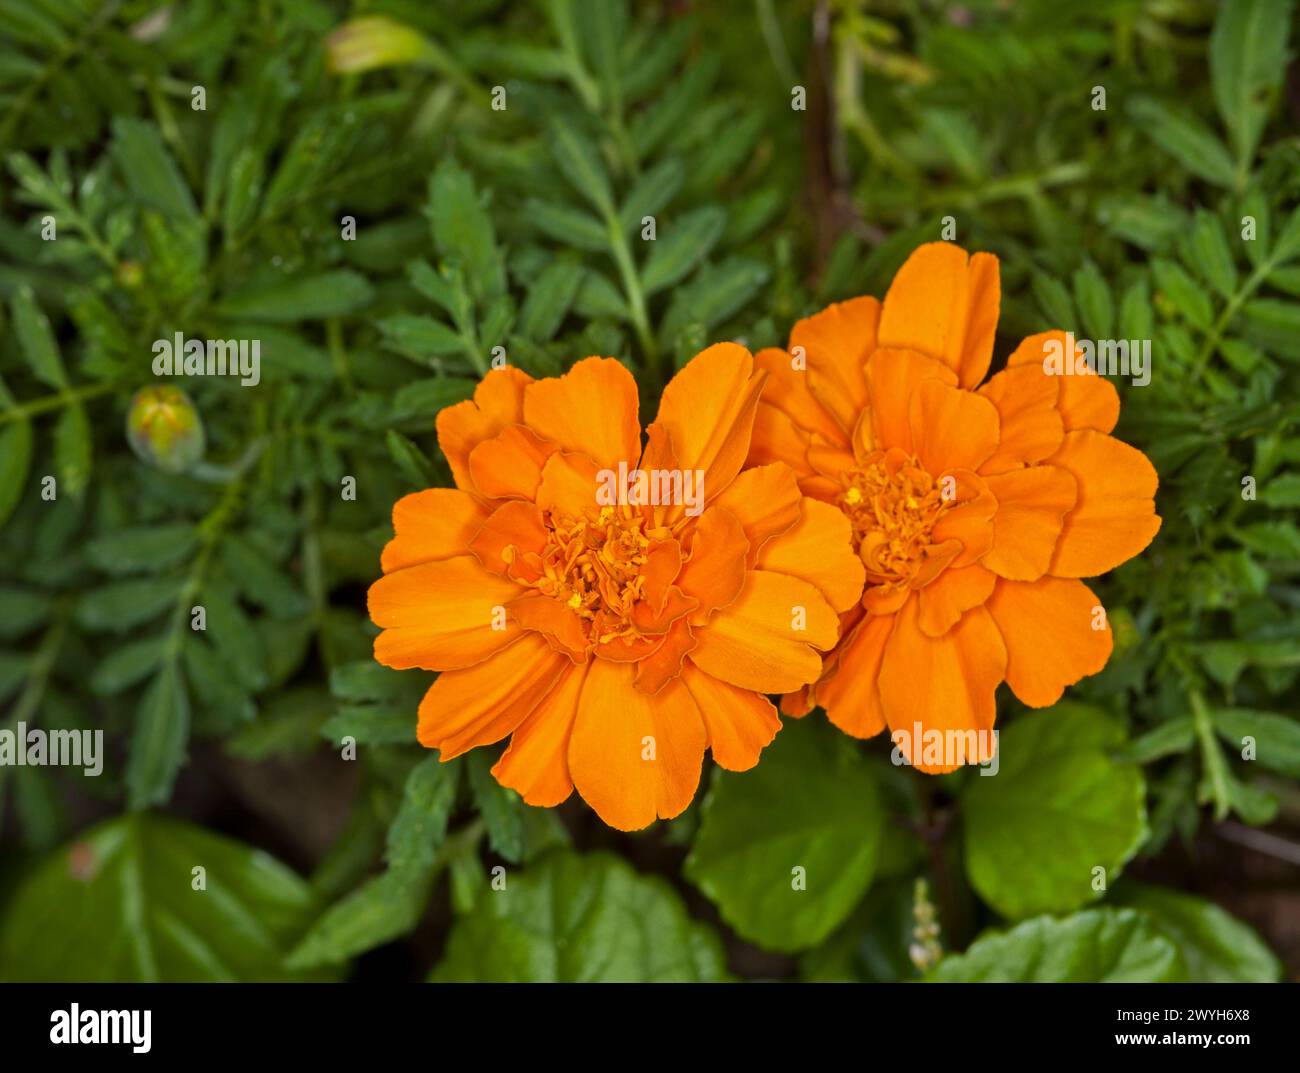 Vivid golden orange flowers of French Marigolds, Tagetes patula, an annual garden plant, on a background of green leaves in a garden Stock Photo